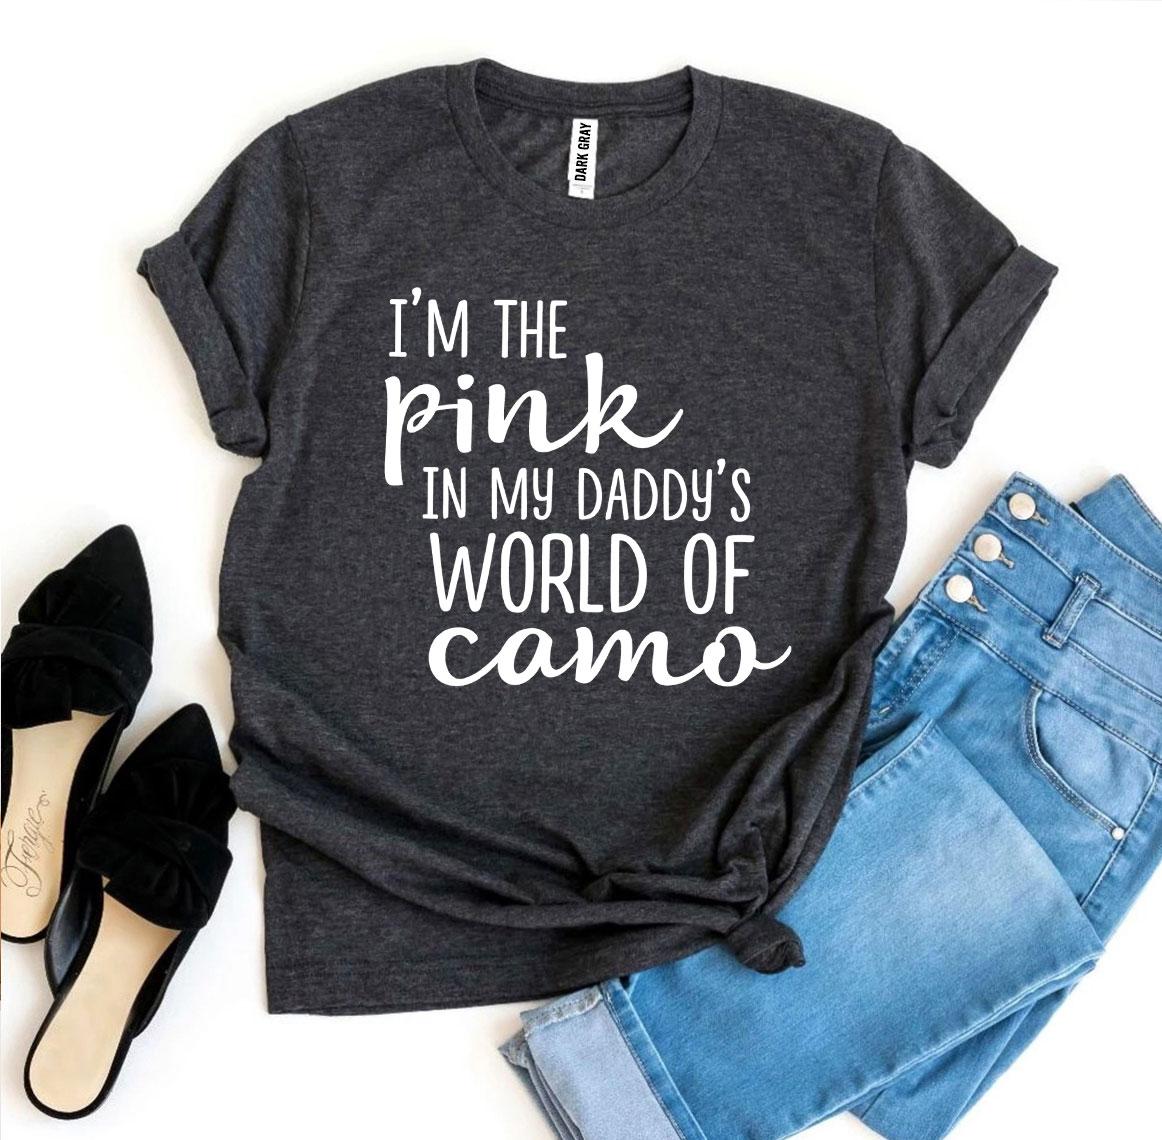 I’m The Pink In My Daddy’s World Of Camo T-shirt